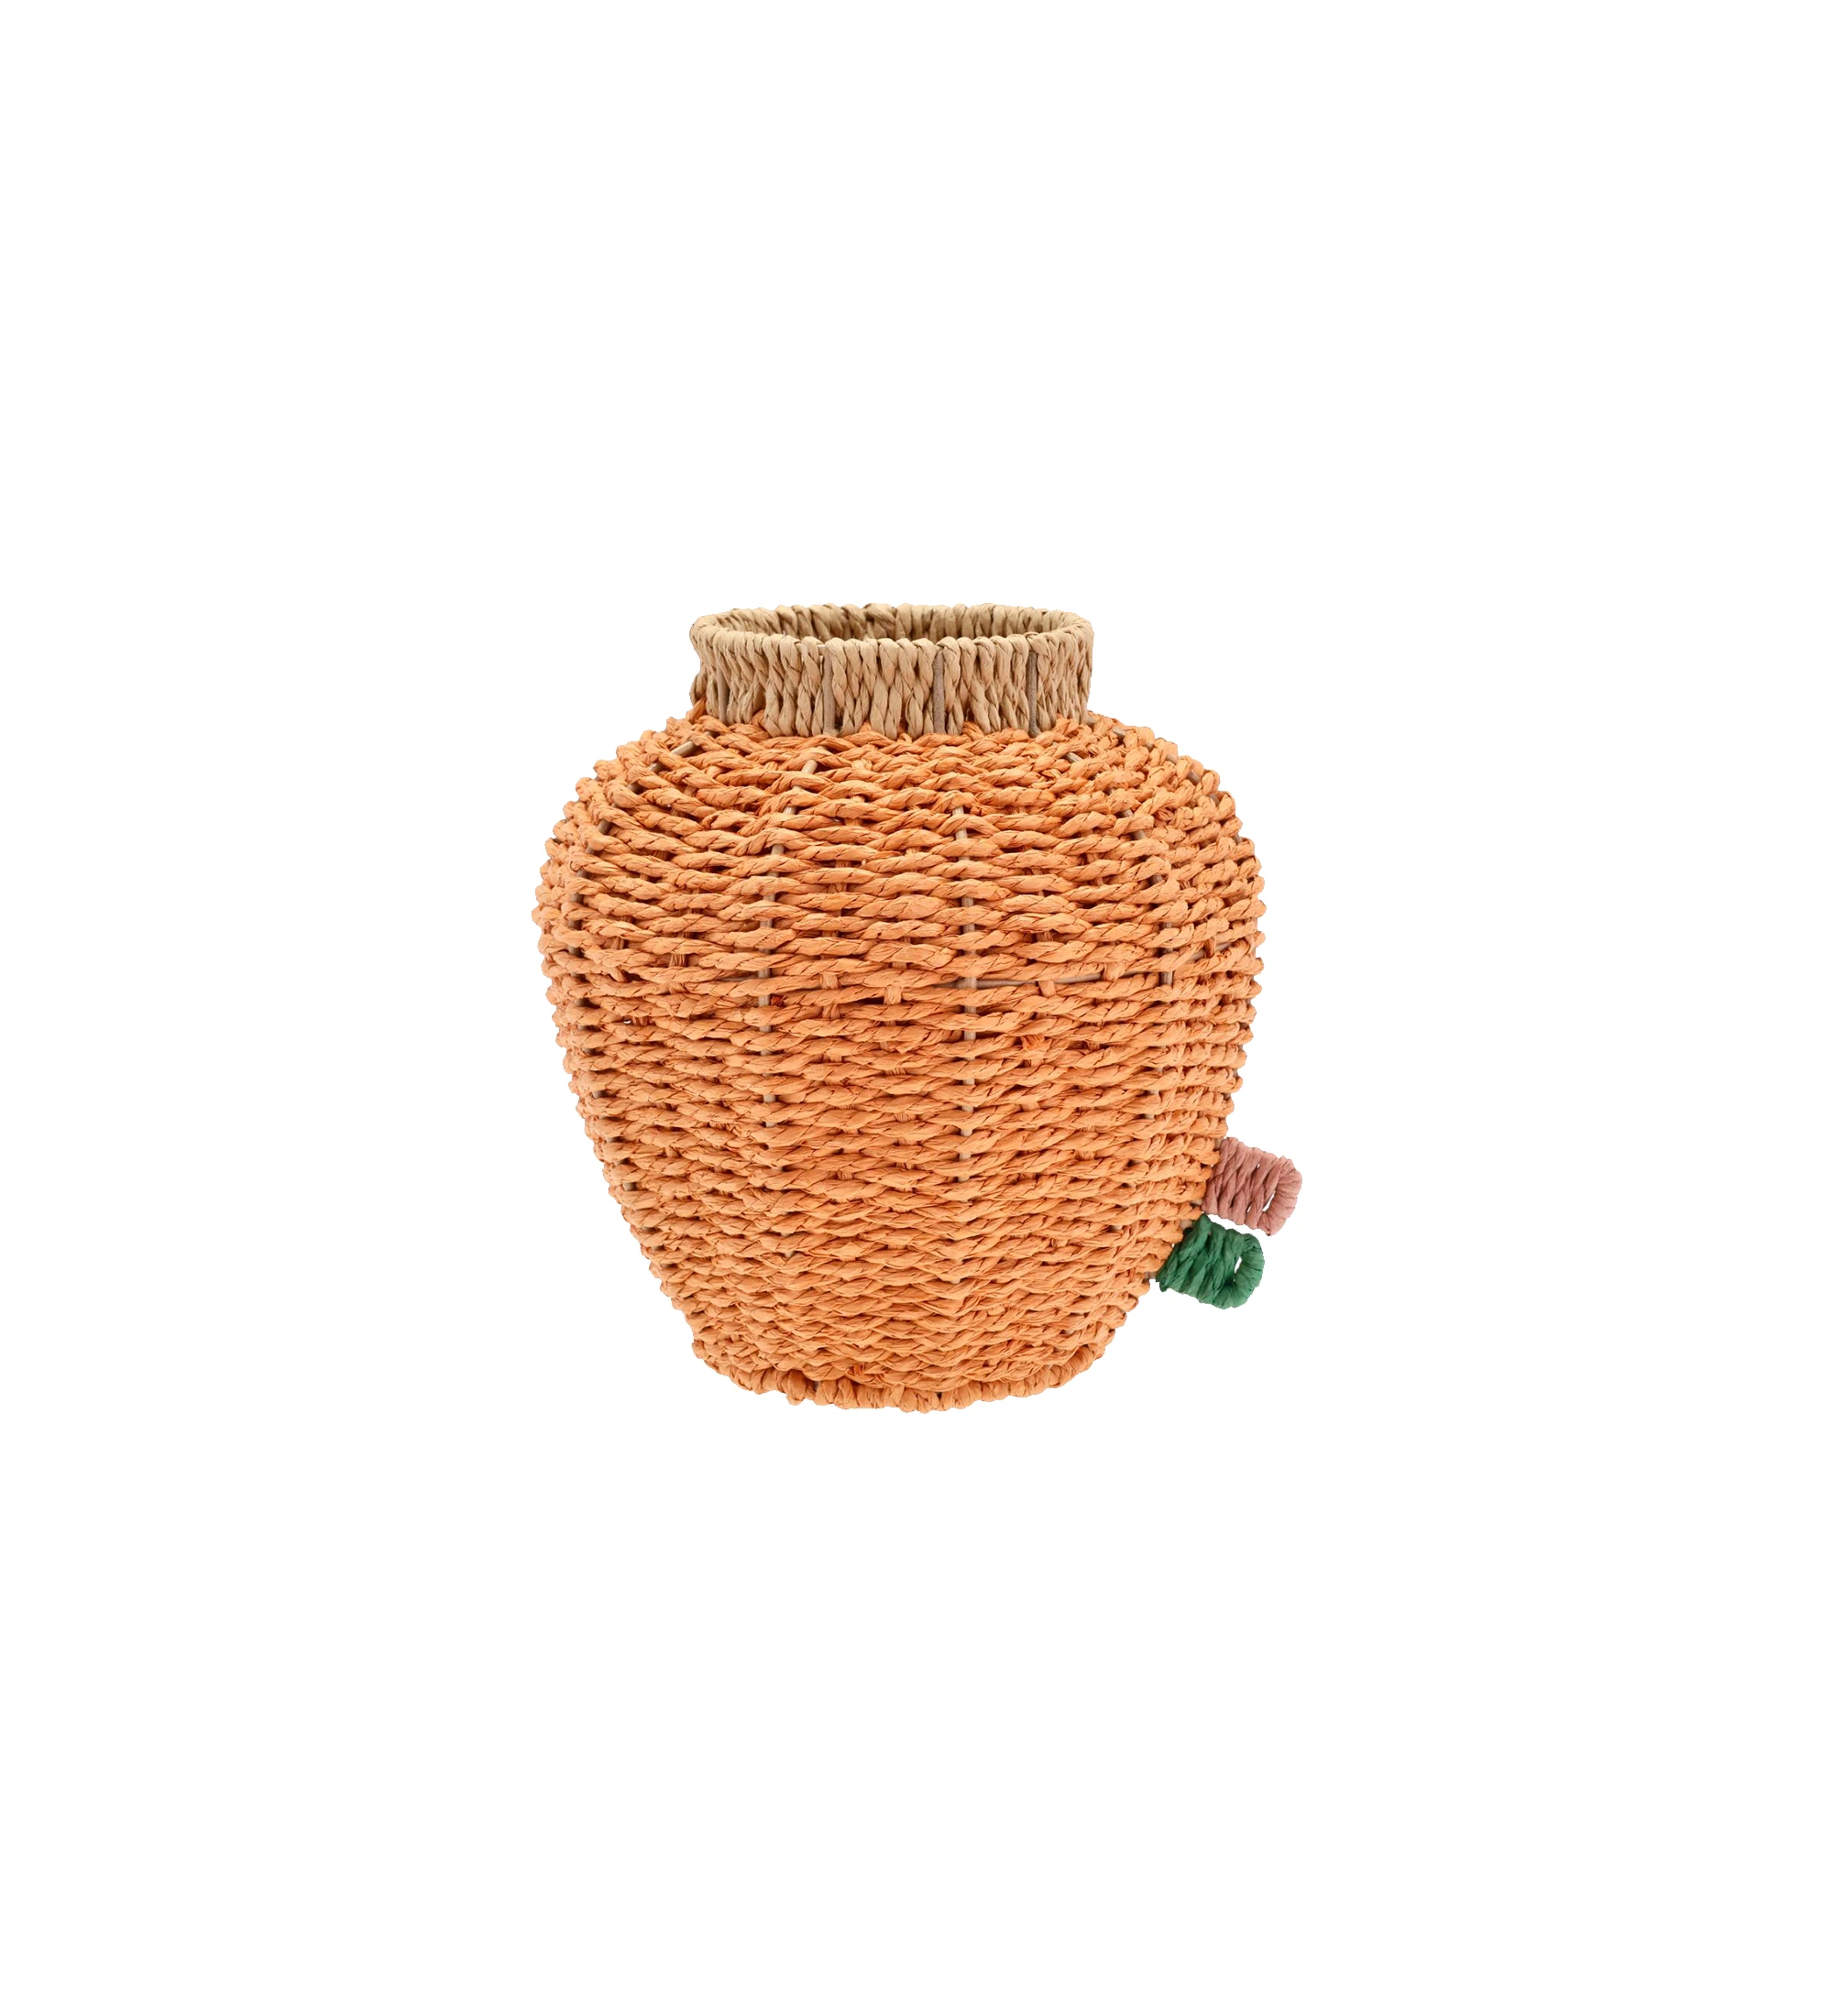 Orange paper cord vase with glass container.